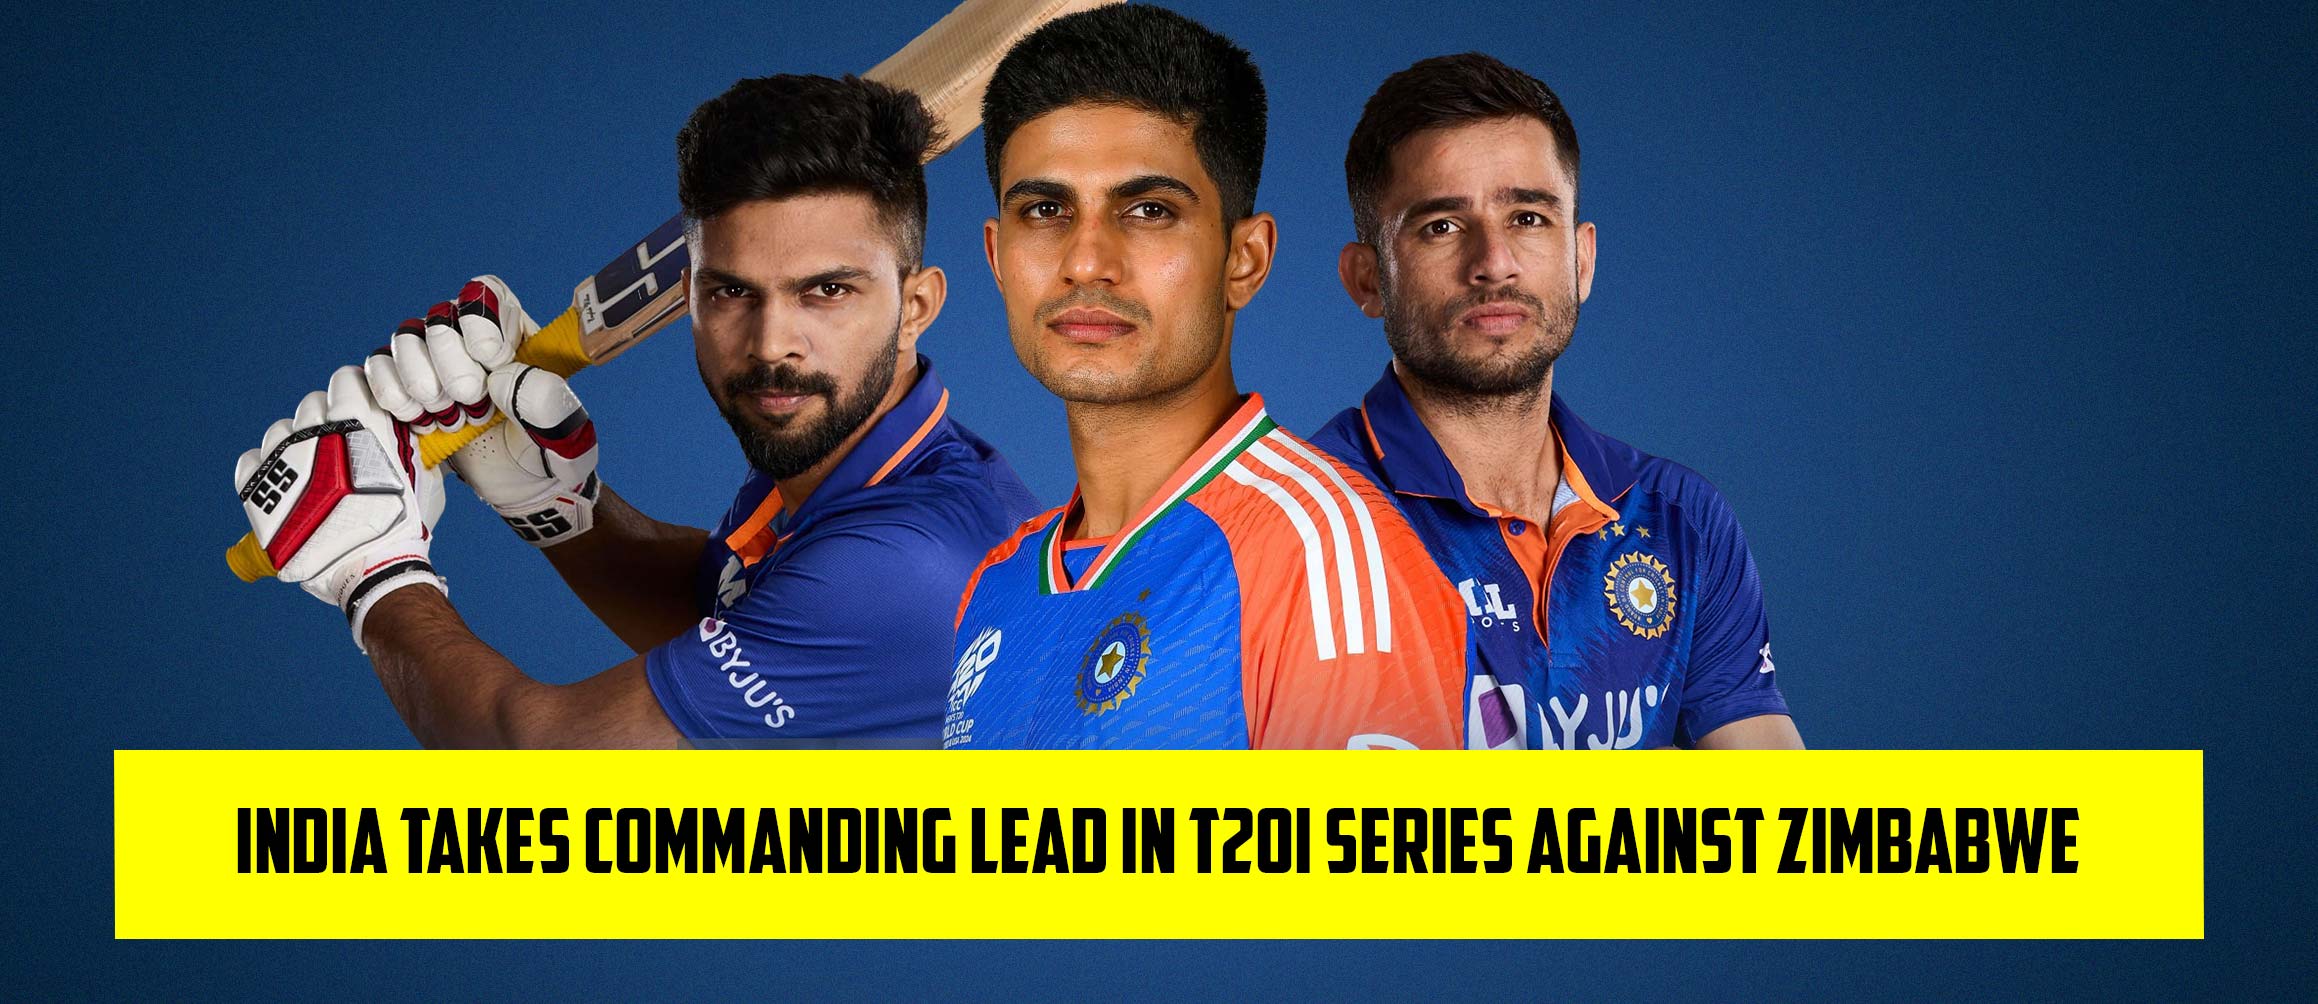 India Takes Commanding Lead in T20I Series Against Zimbabwe